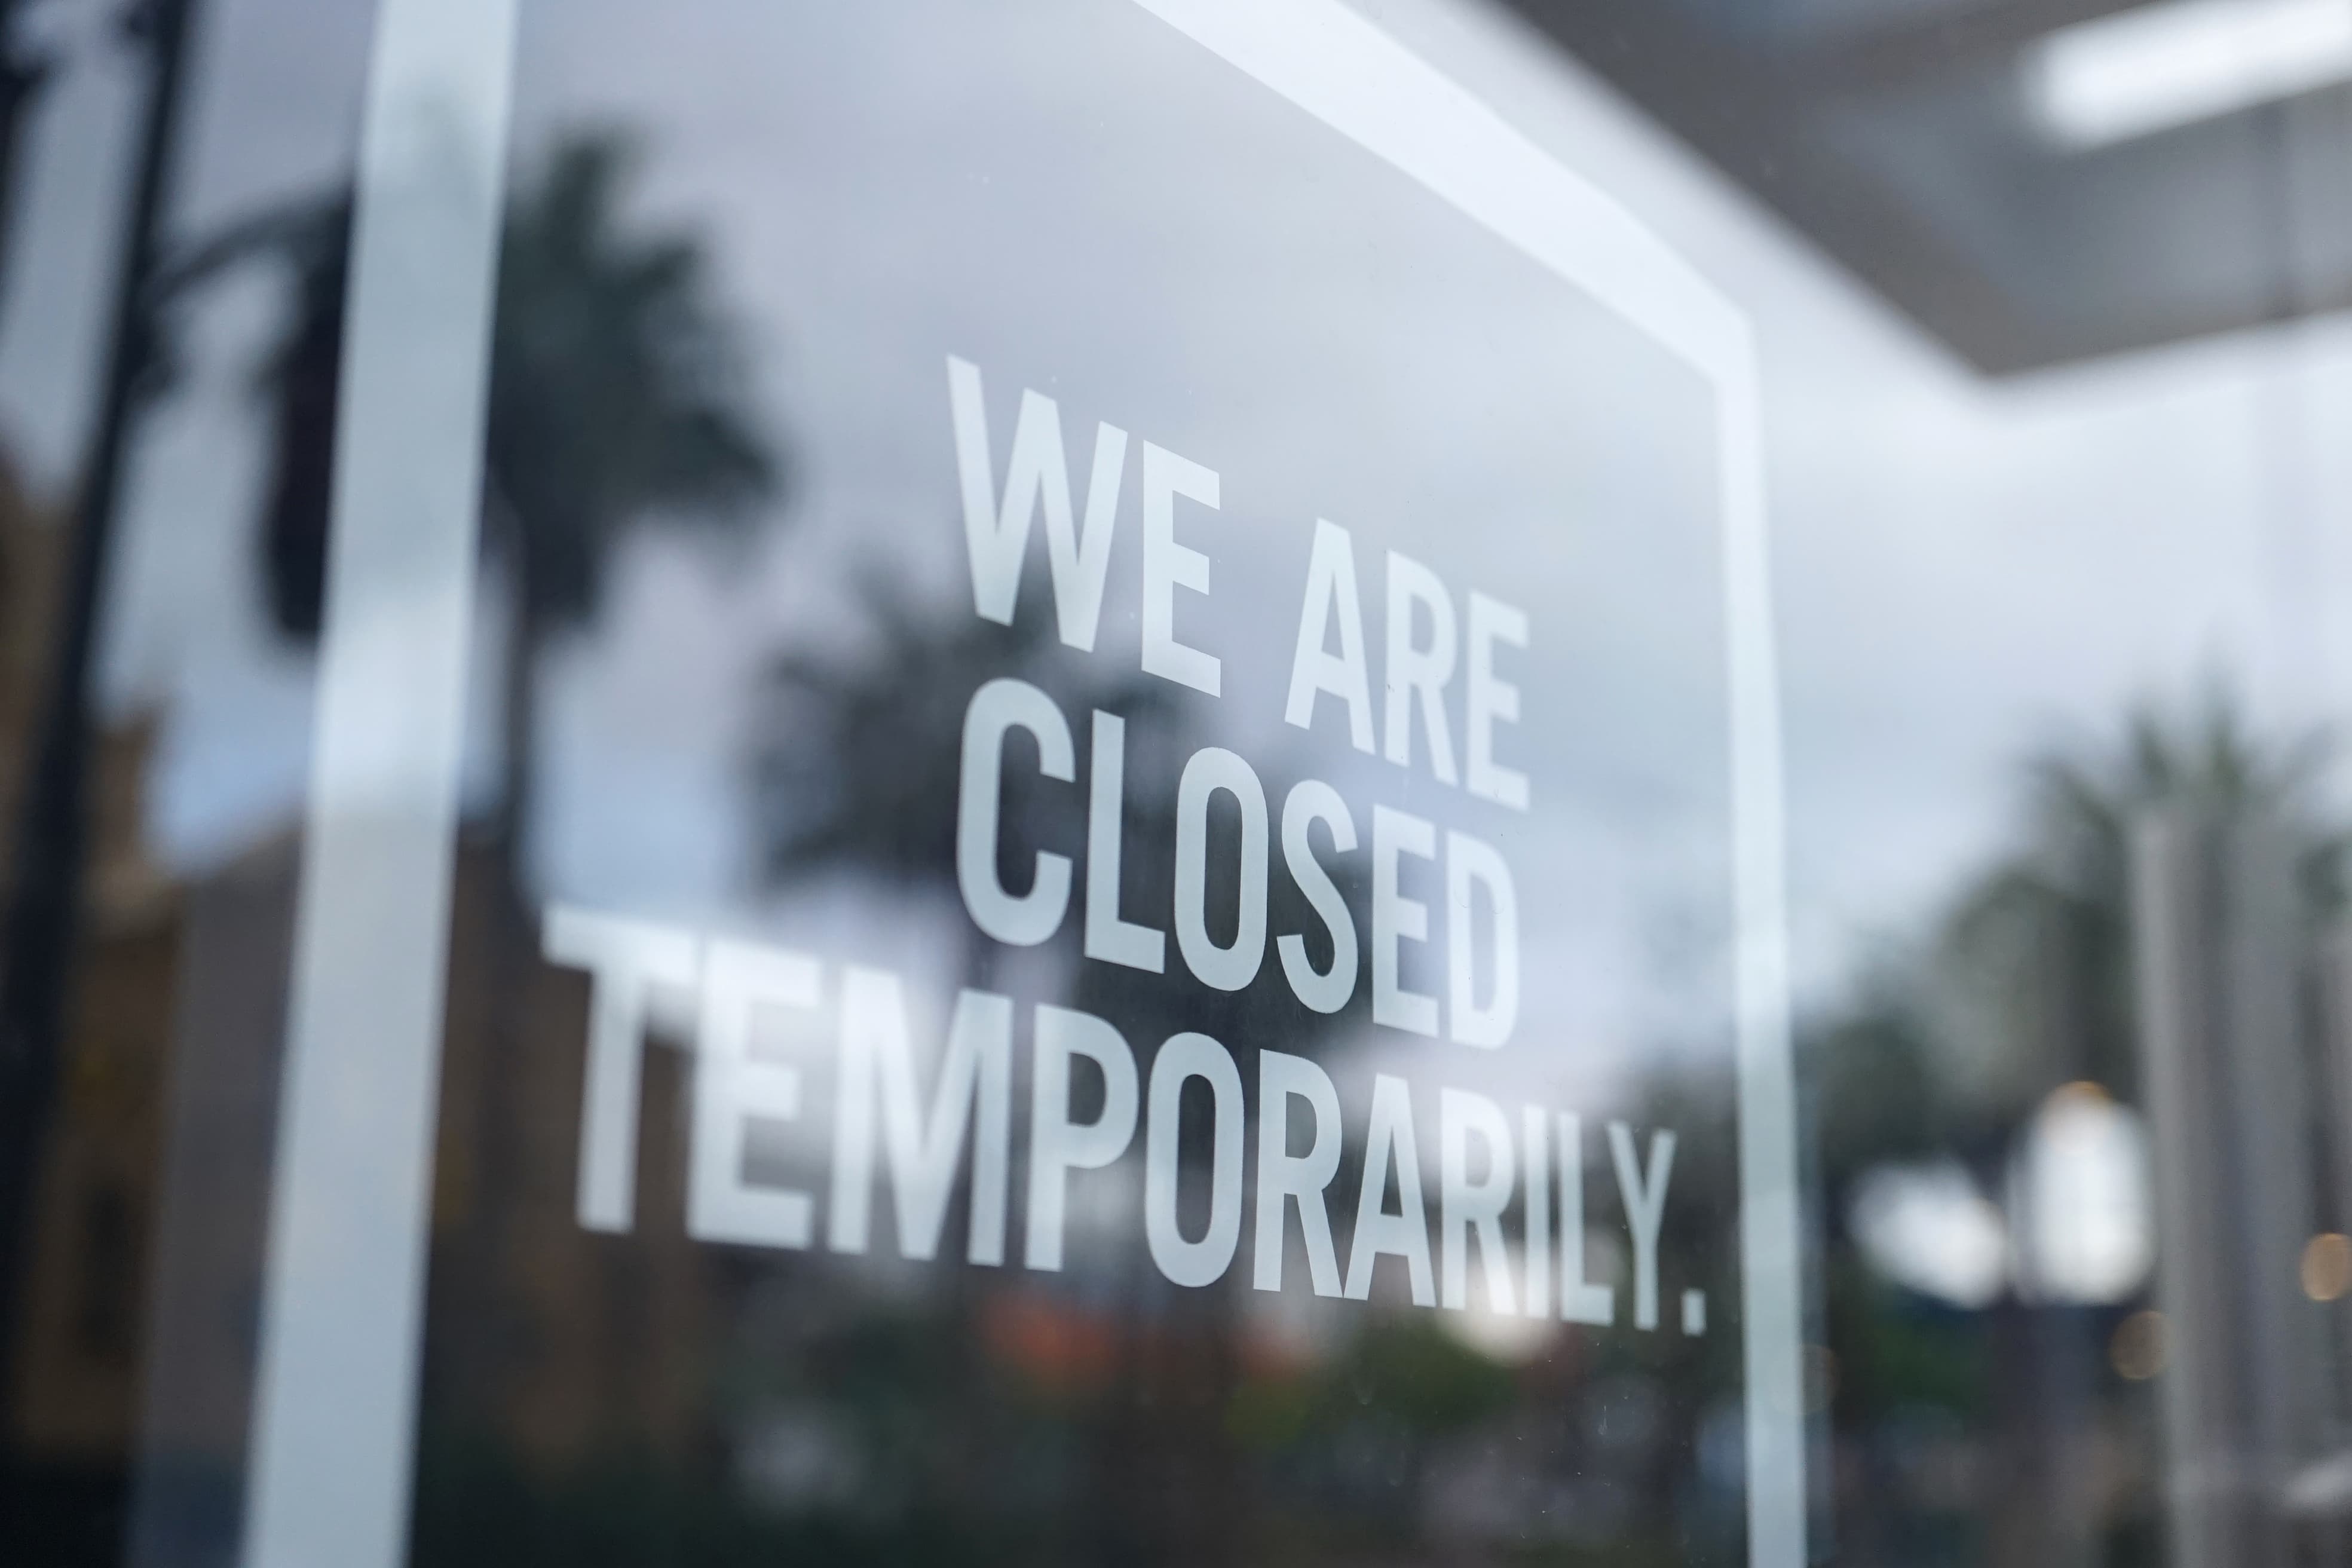 We are closed sign - 20,000-25,000 US stores will close in 2020